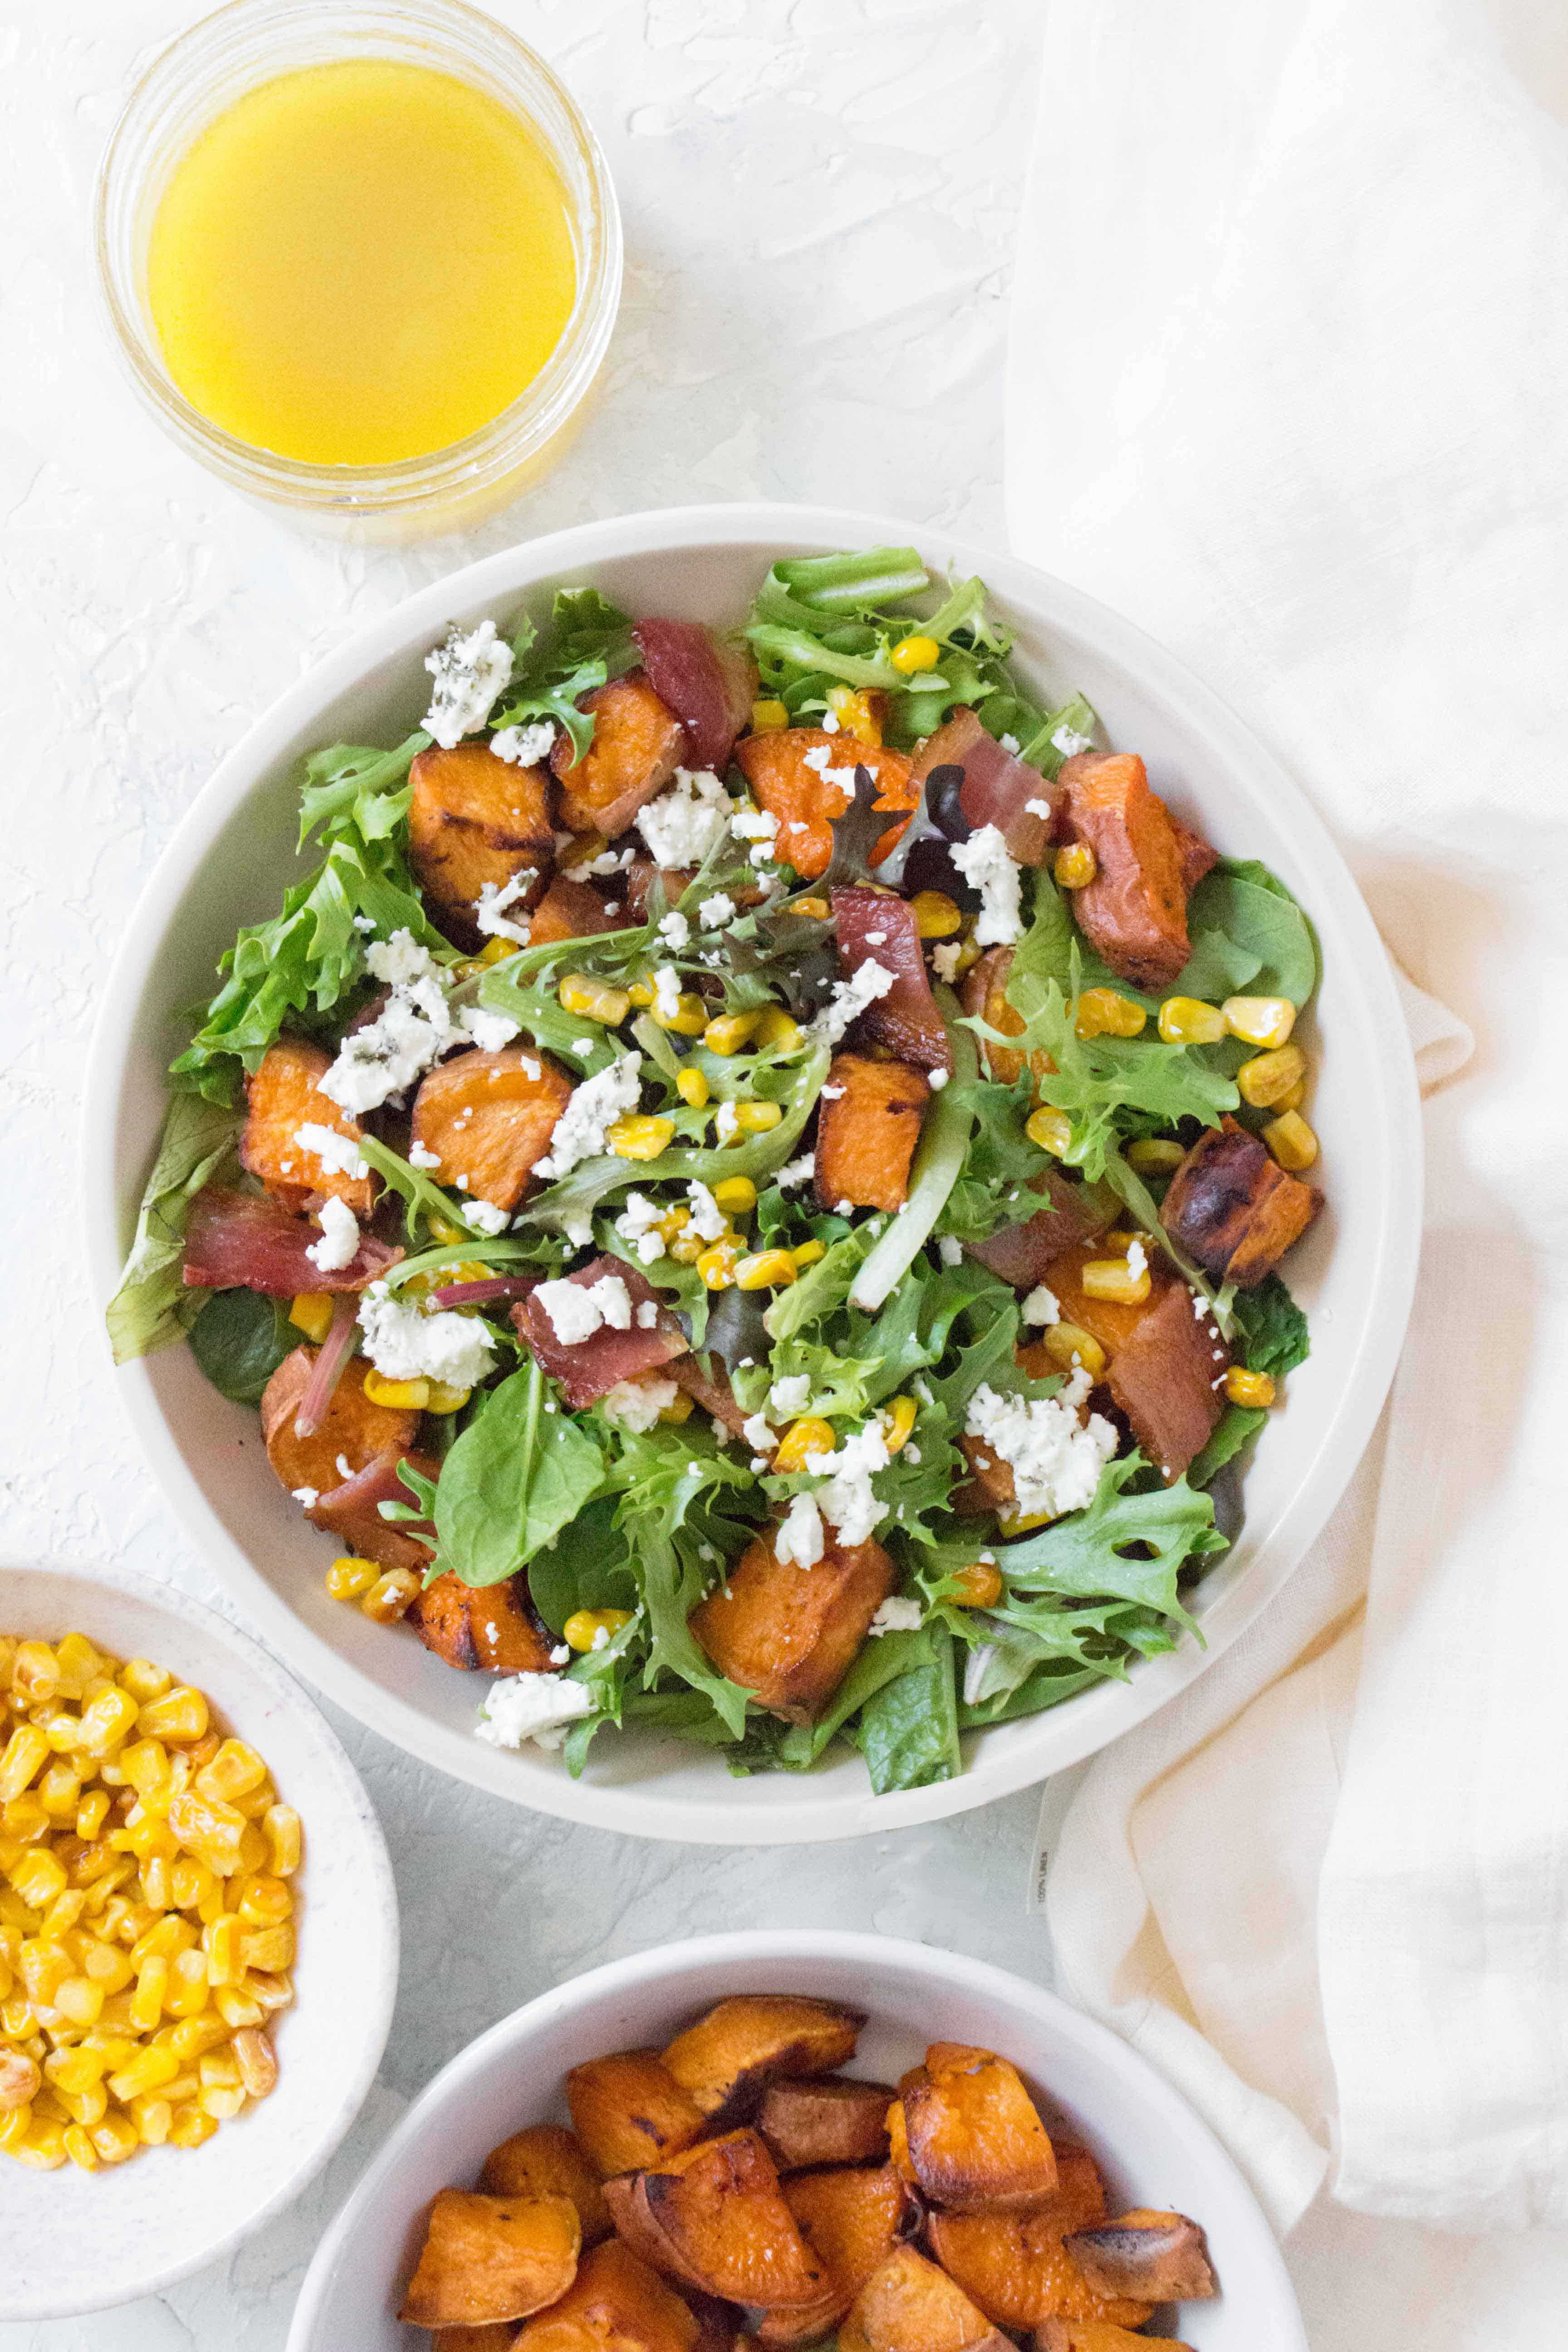 This Roasted Sweet Potato Salad with Corn and Bacon is the perfect salad for your meal prep or dinner party!